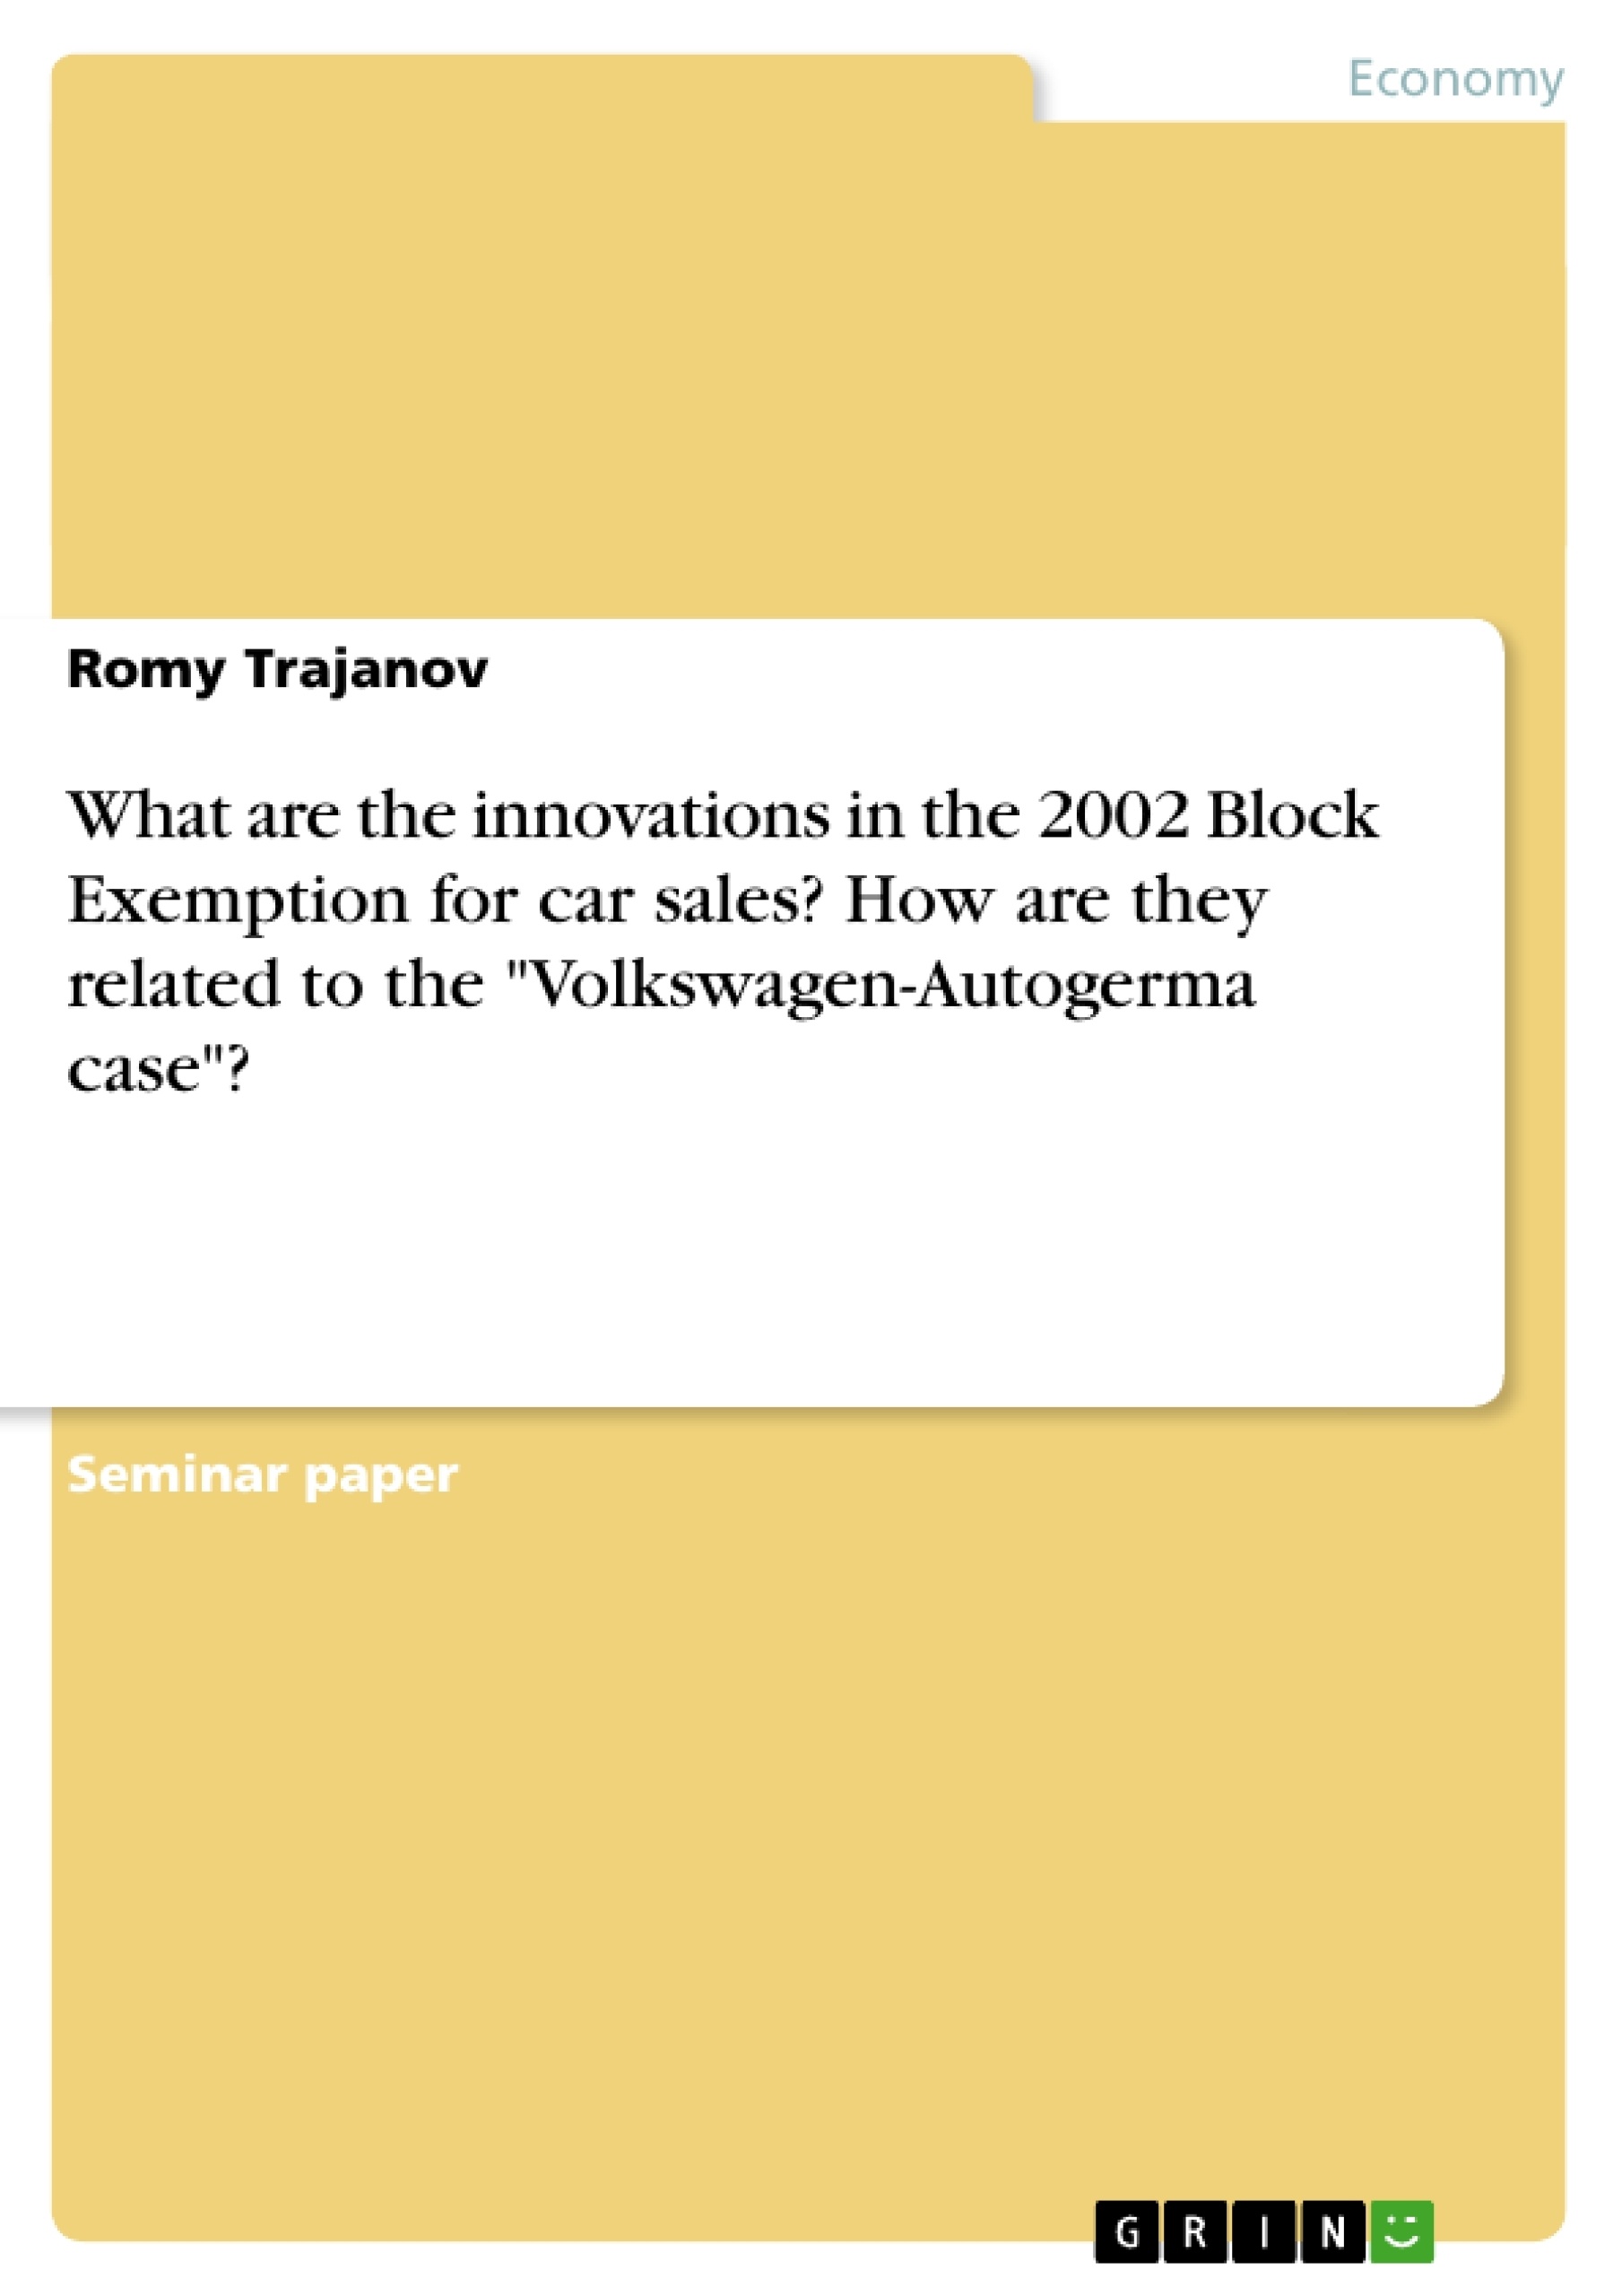 Titre: What are the innovations in the 2002 Block Exemption for car sales? How are they related to the "Volkswagen-Autogerma case"?